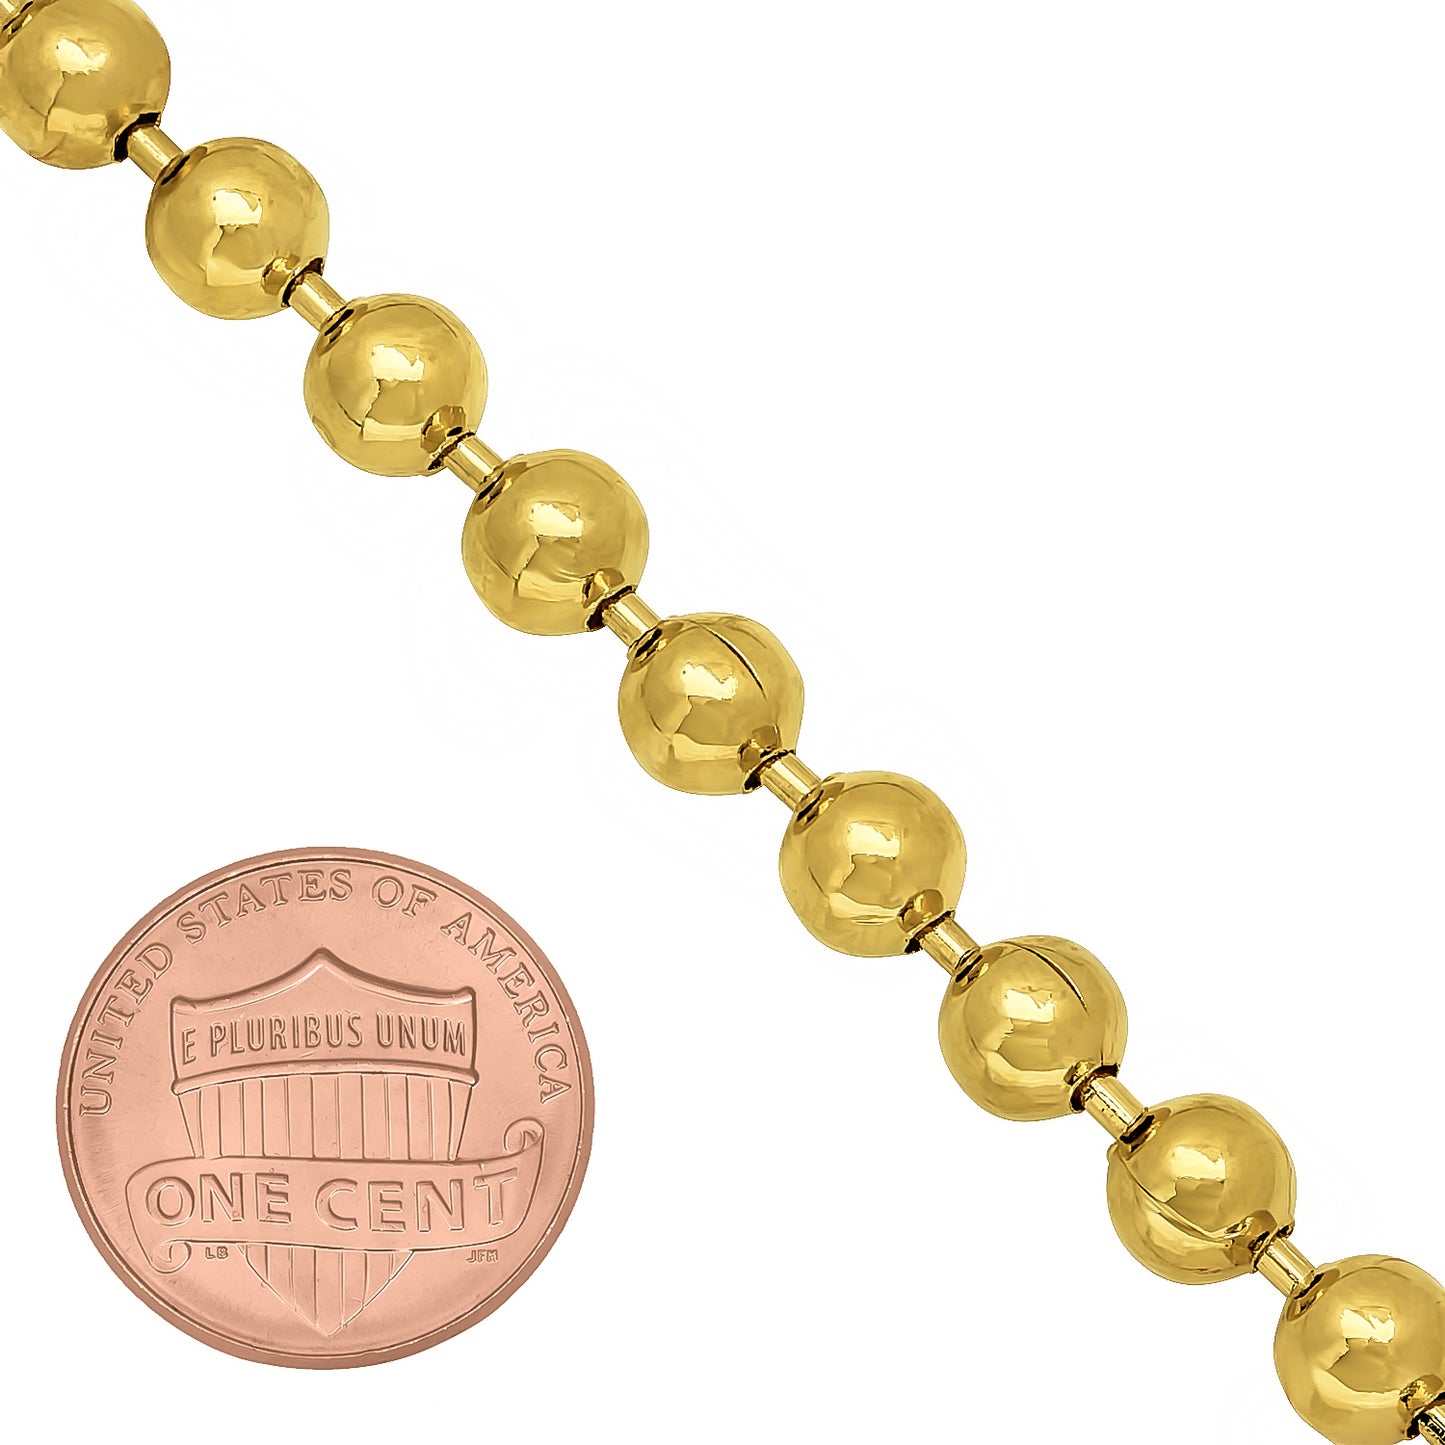 1mm-6mm 14k Yellow Gold Plated Ball Military Chain Necklace or Bracelet (SKU: GL-BALL-CHAINS)